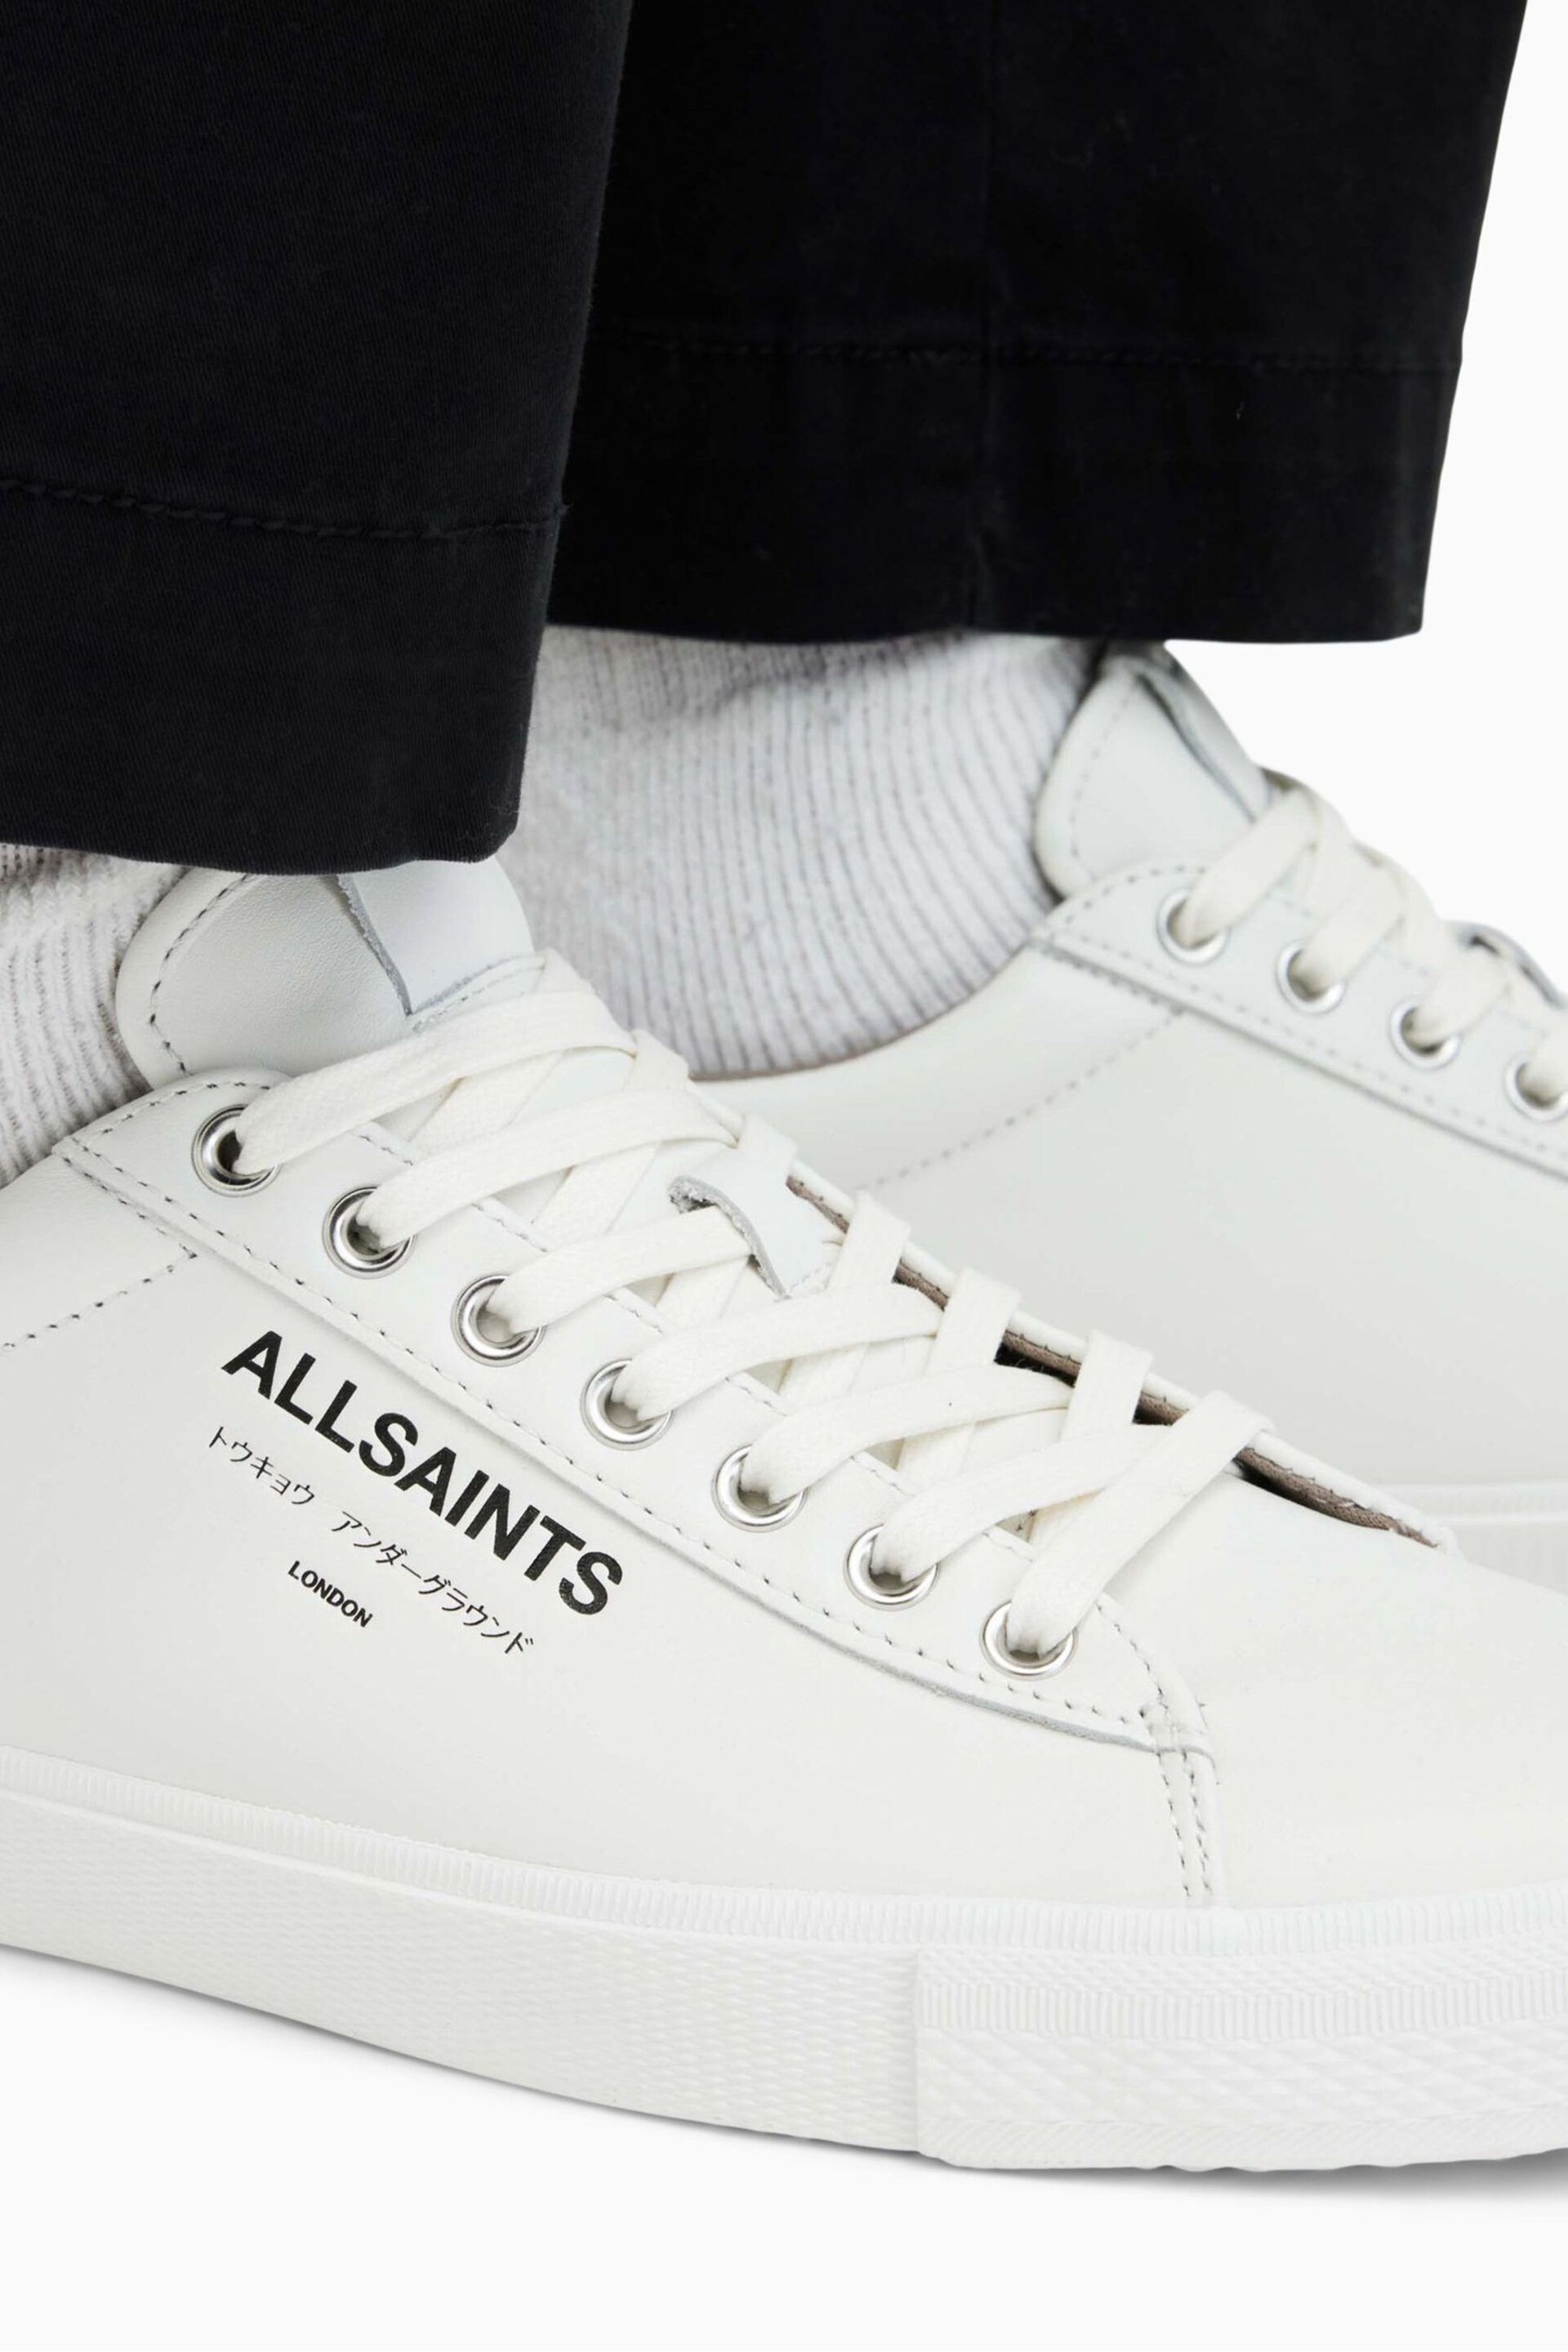 AllSaints White Underground Leather Low Top Trainers - Image 6 of 7